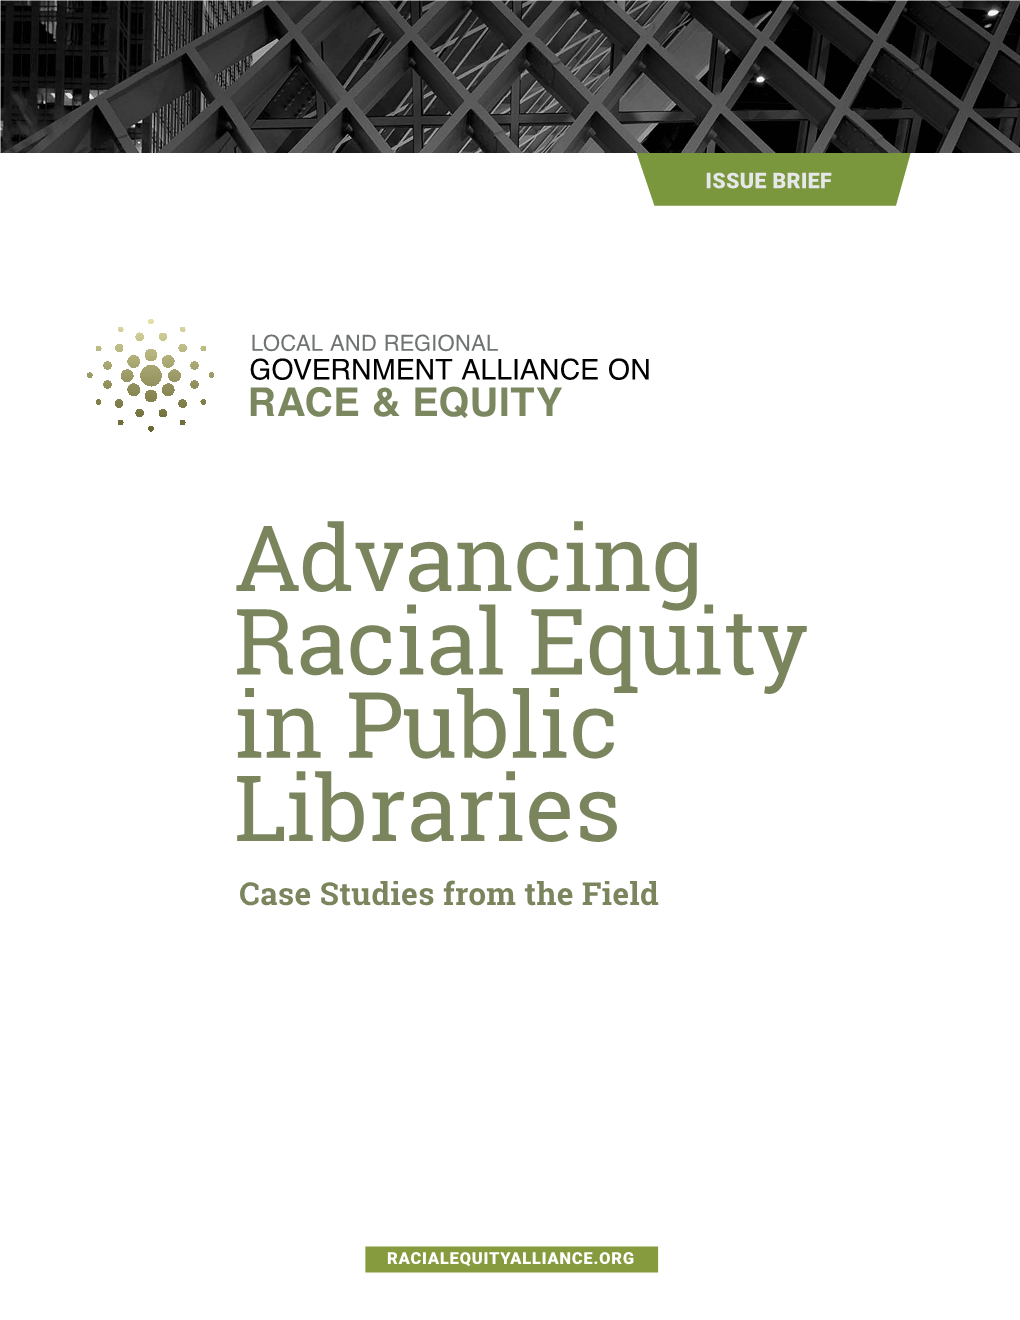 Advancing Racial Equity in Public Libraries Here